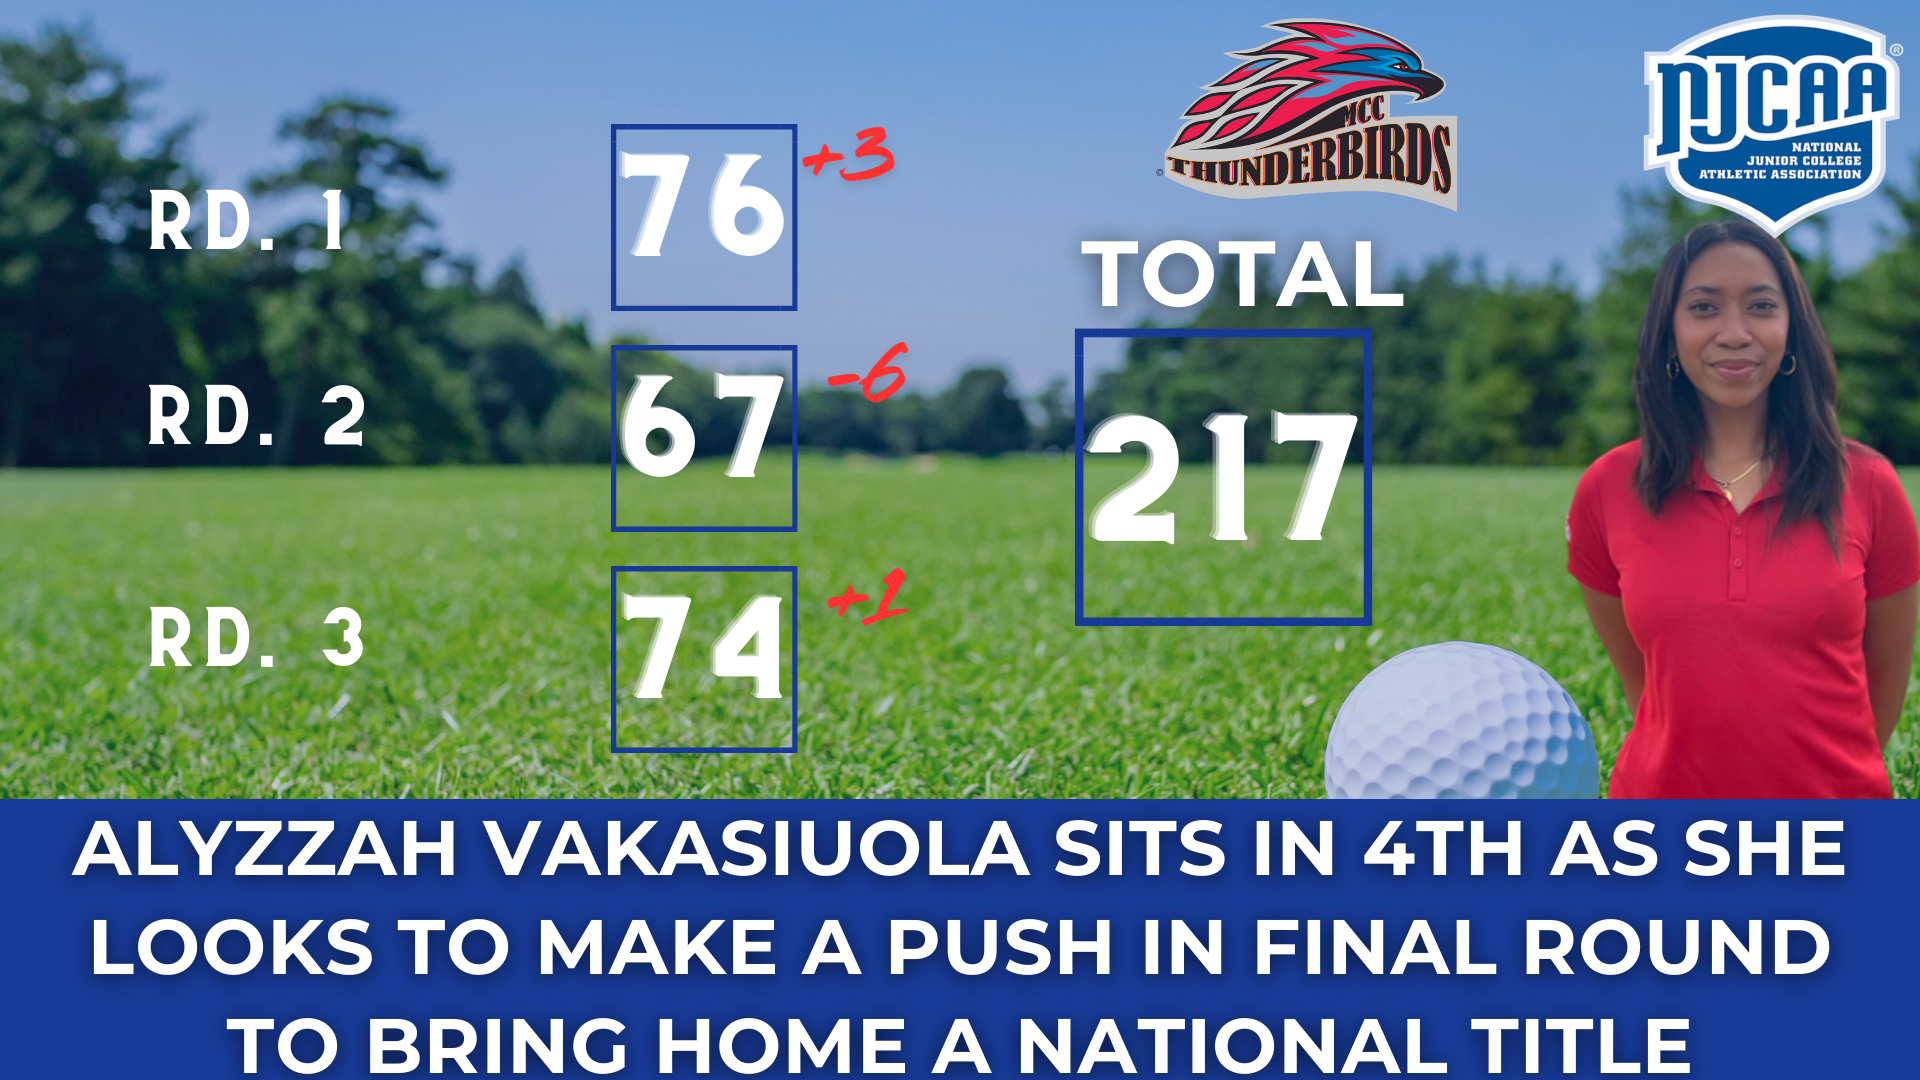 Vakasiuola looks to make push for national title in last day of Golf Nationals